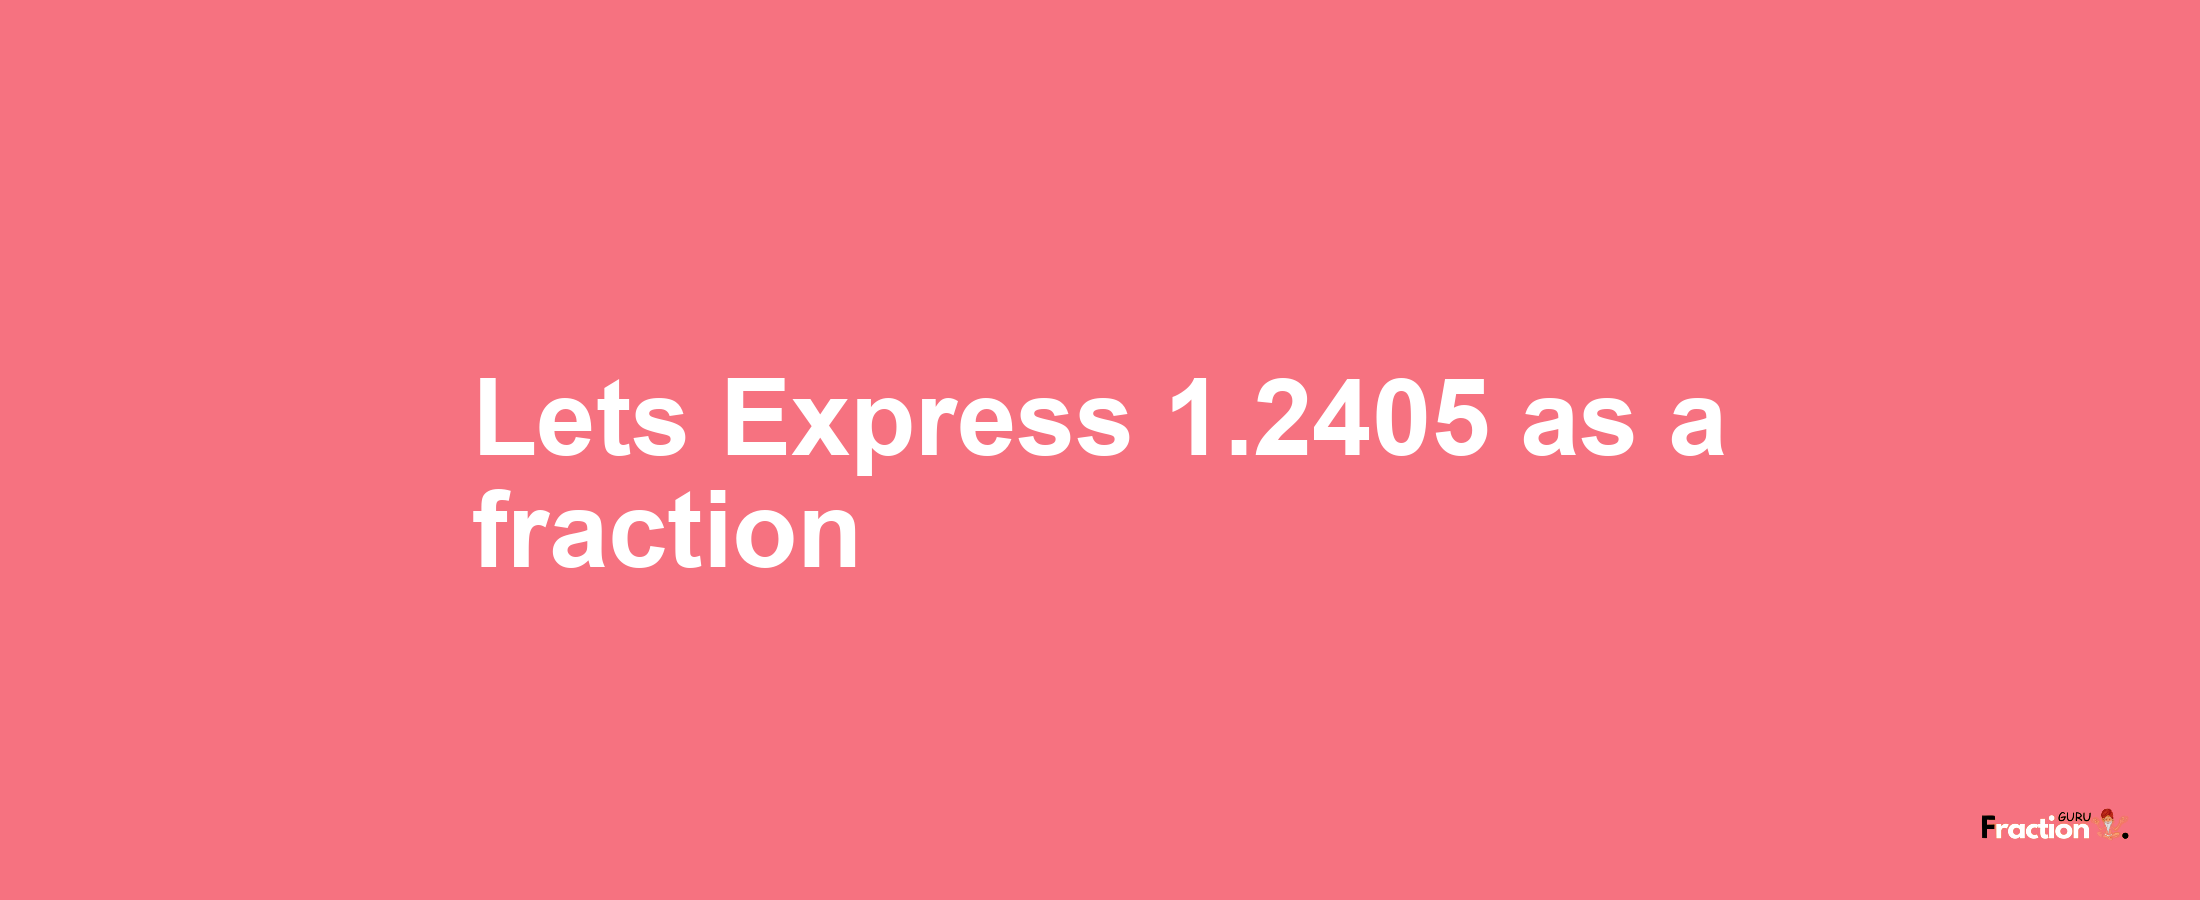 Lets Express 1.2405 as afraction